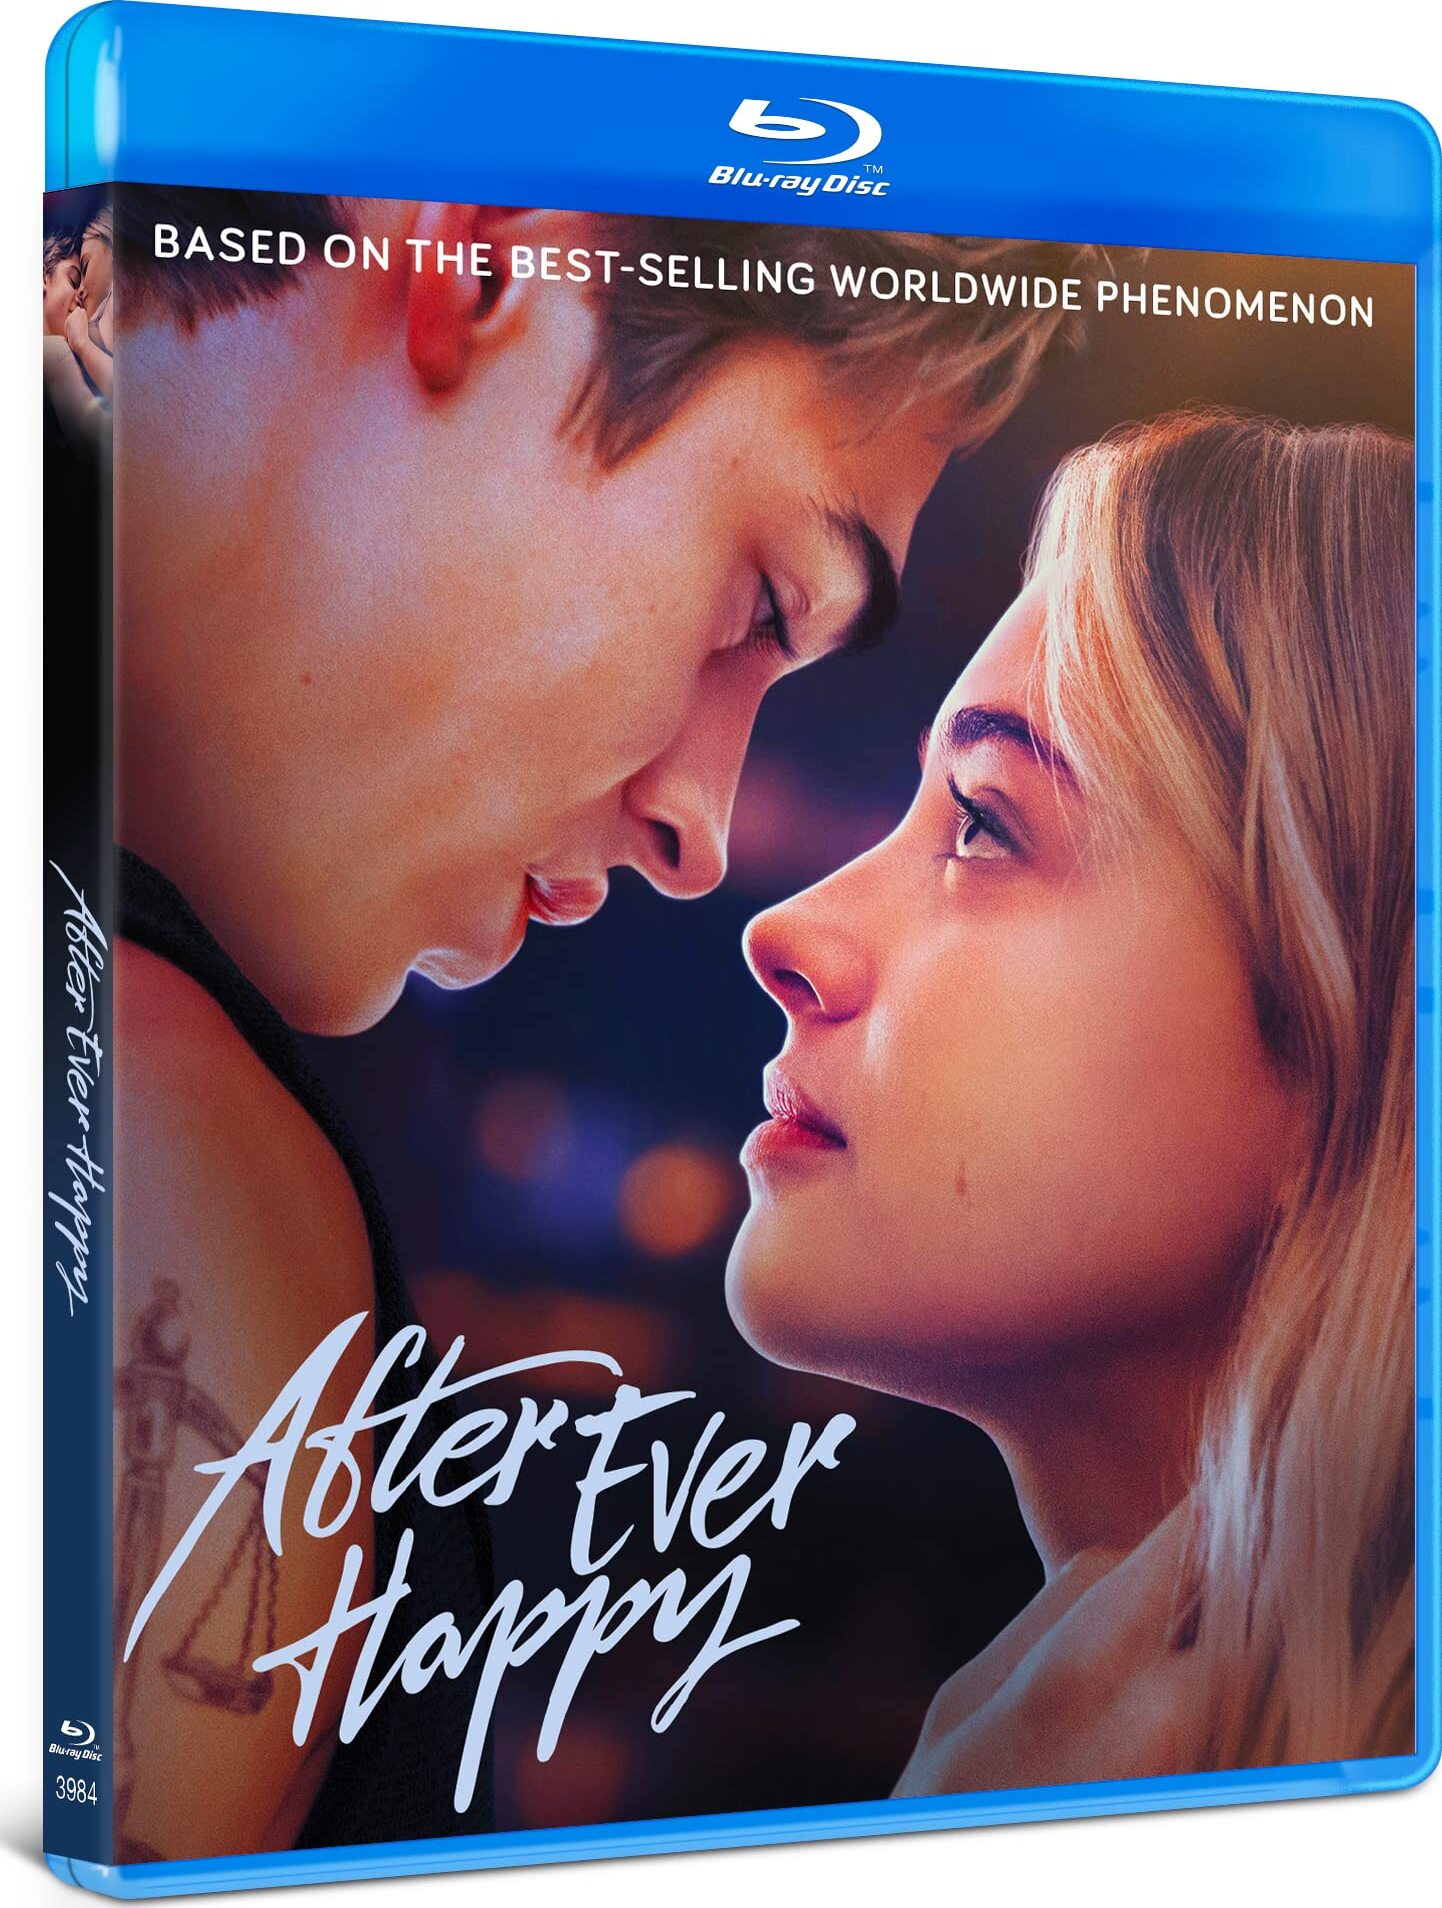 Happy Ever After Blu-ray | myglobaltax.com